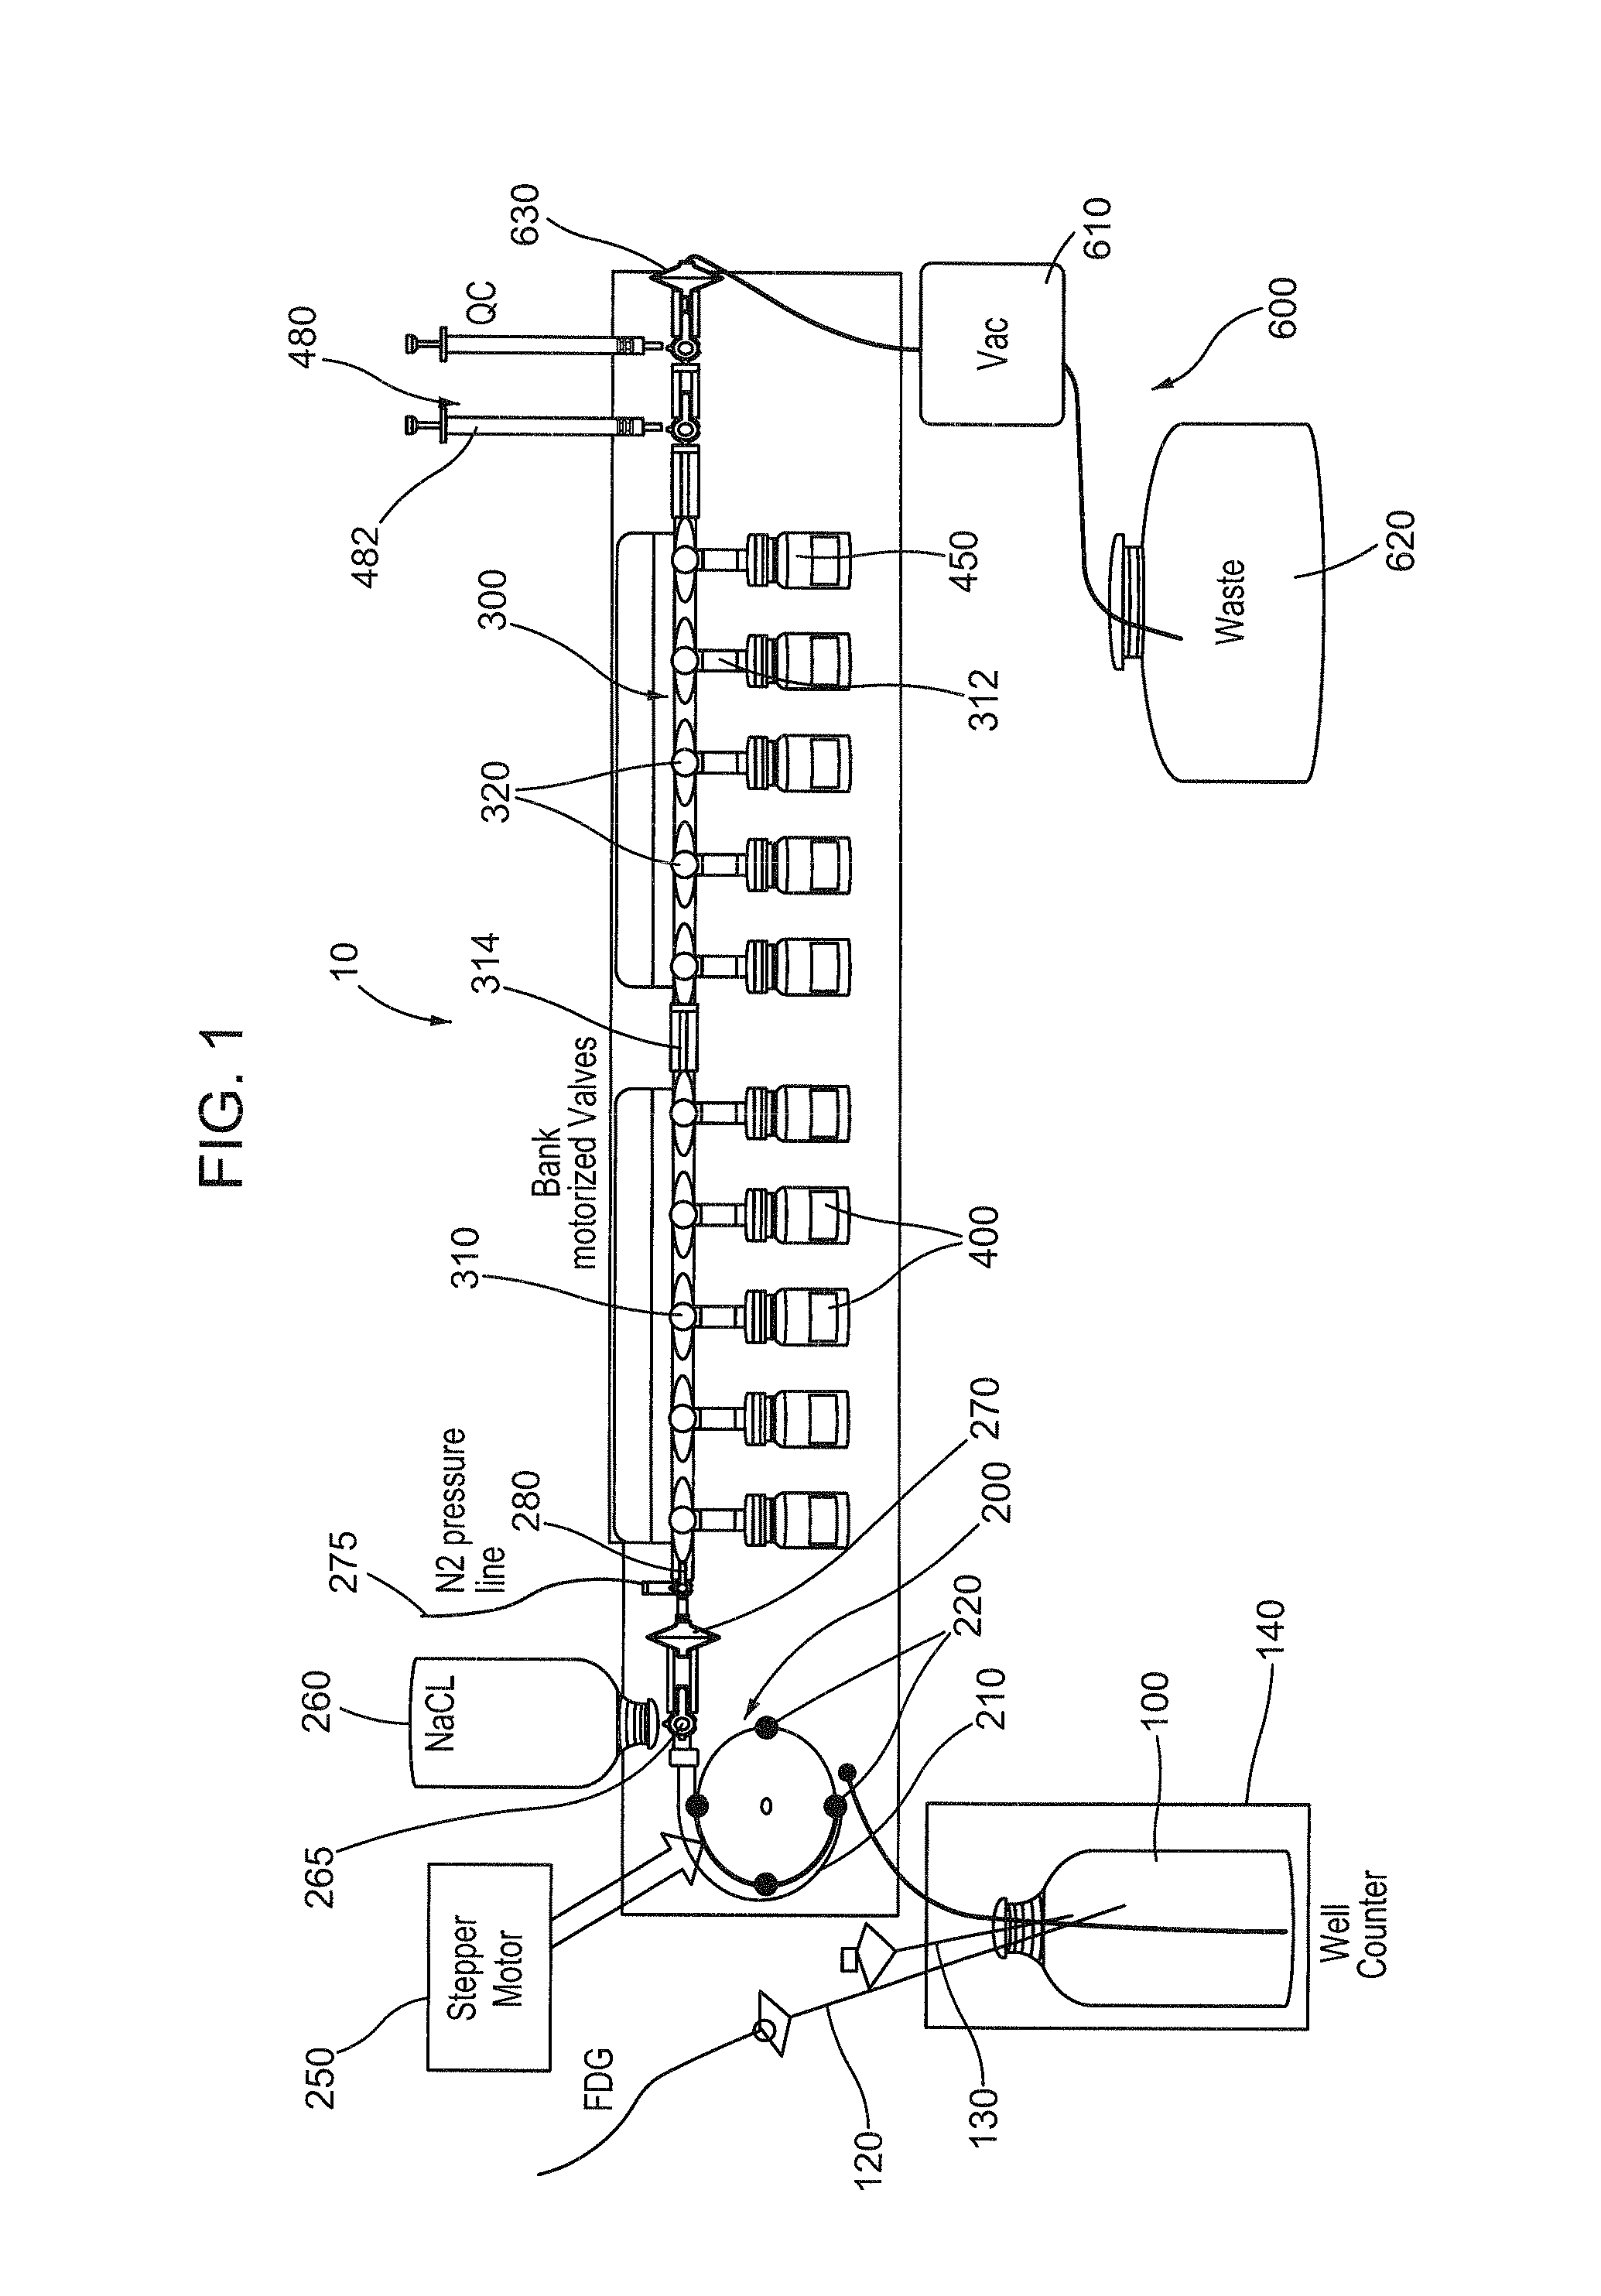 Closed vial fill system for aseptic dispensing